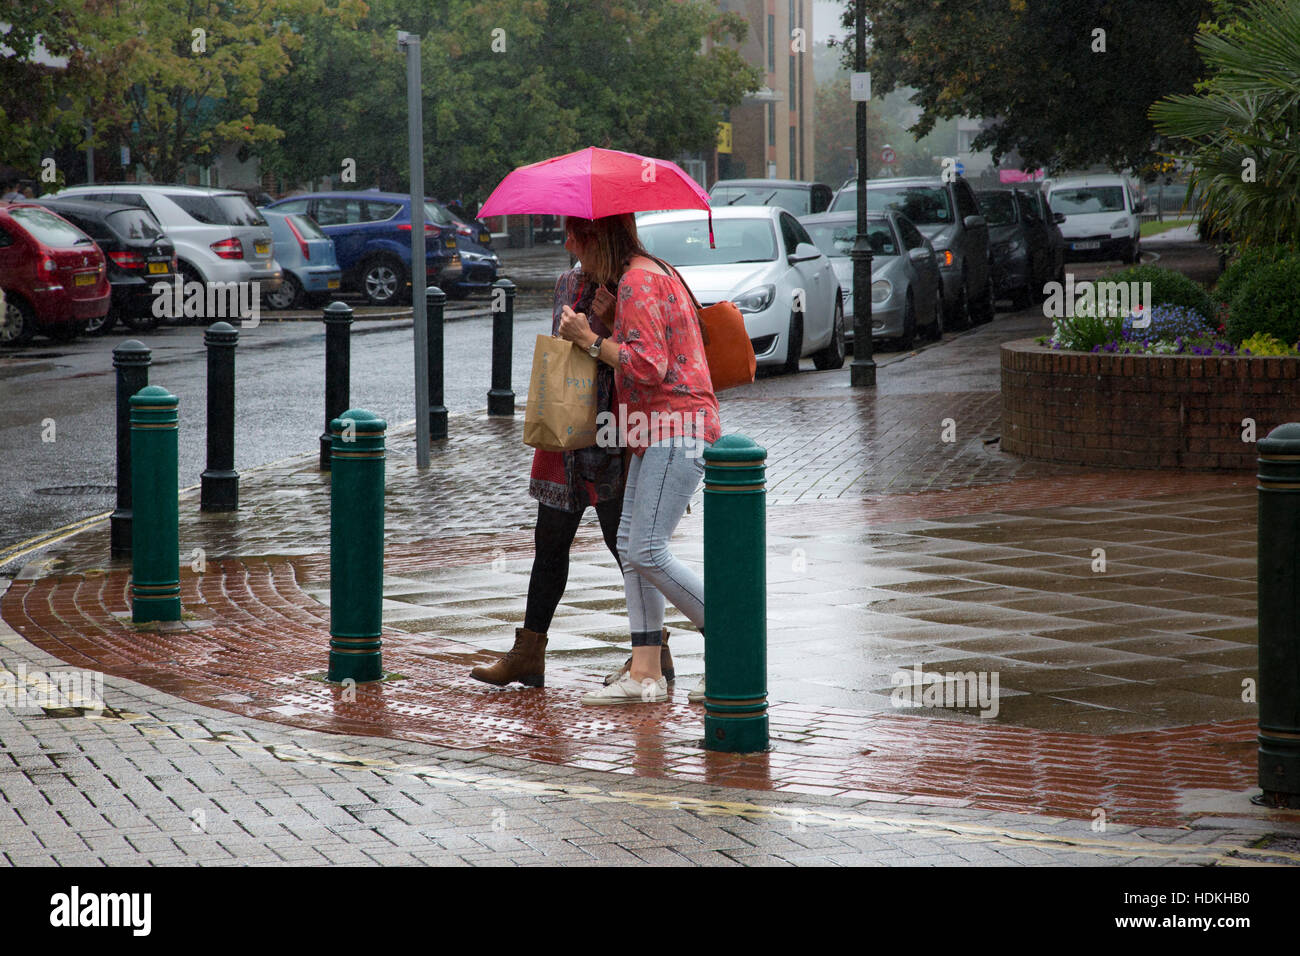 Two women share a pink umbrella while crossing a wet pavement in Crawley,Sussex, UK. Stock Photo